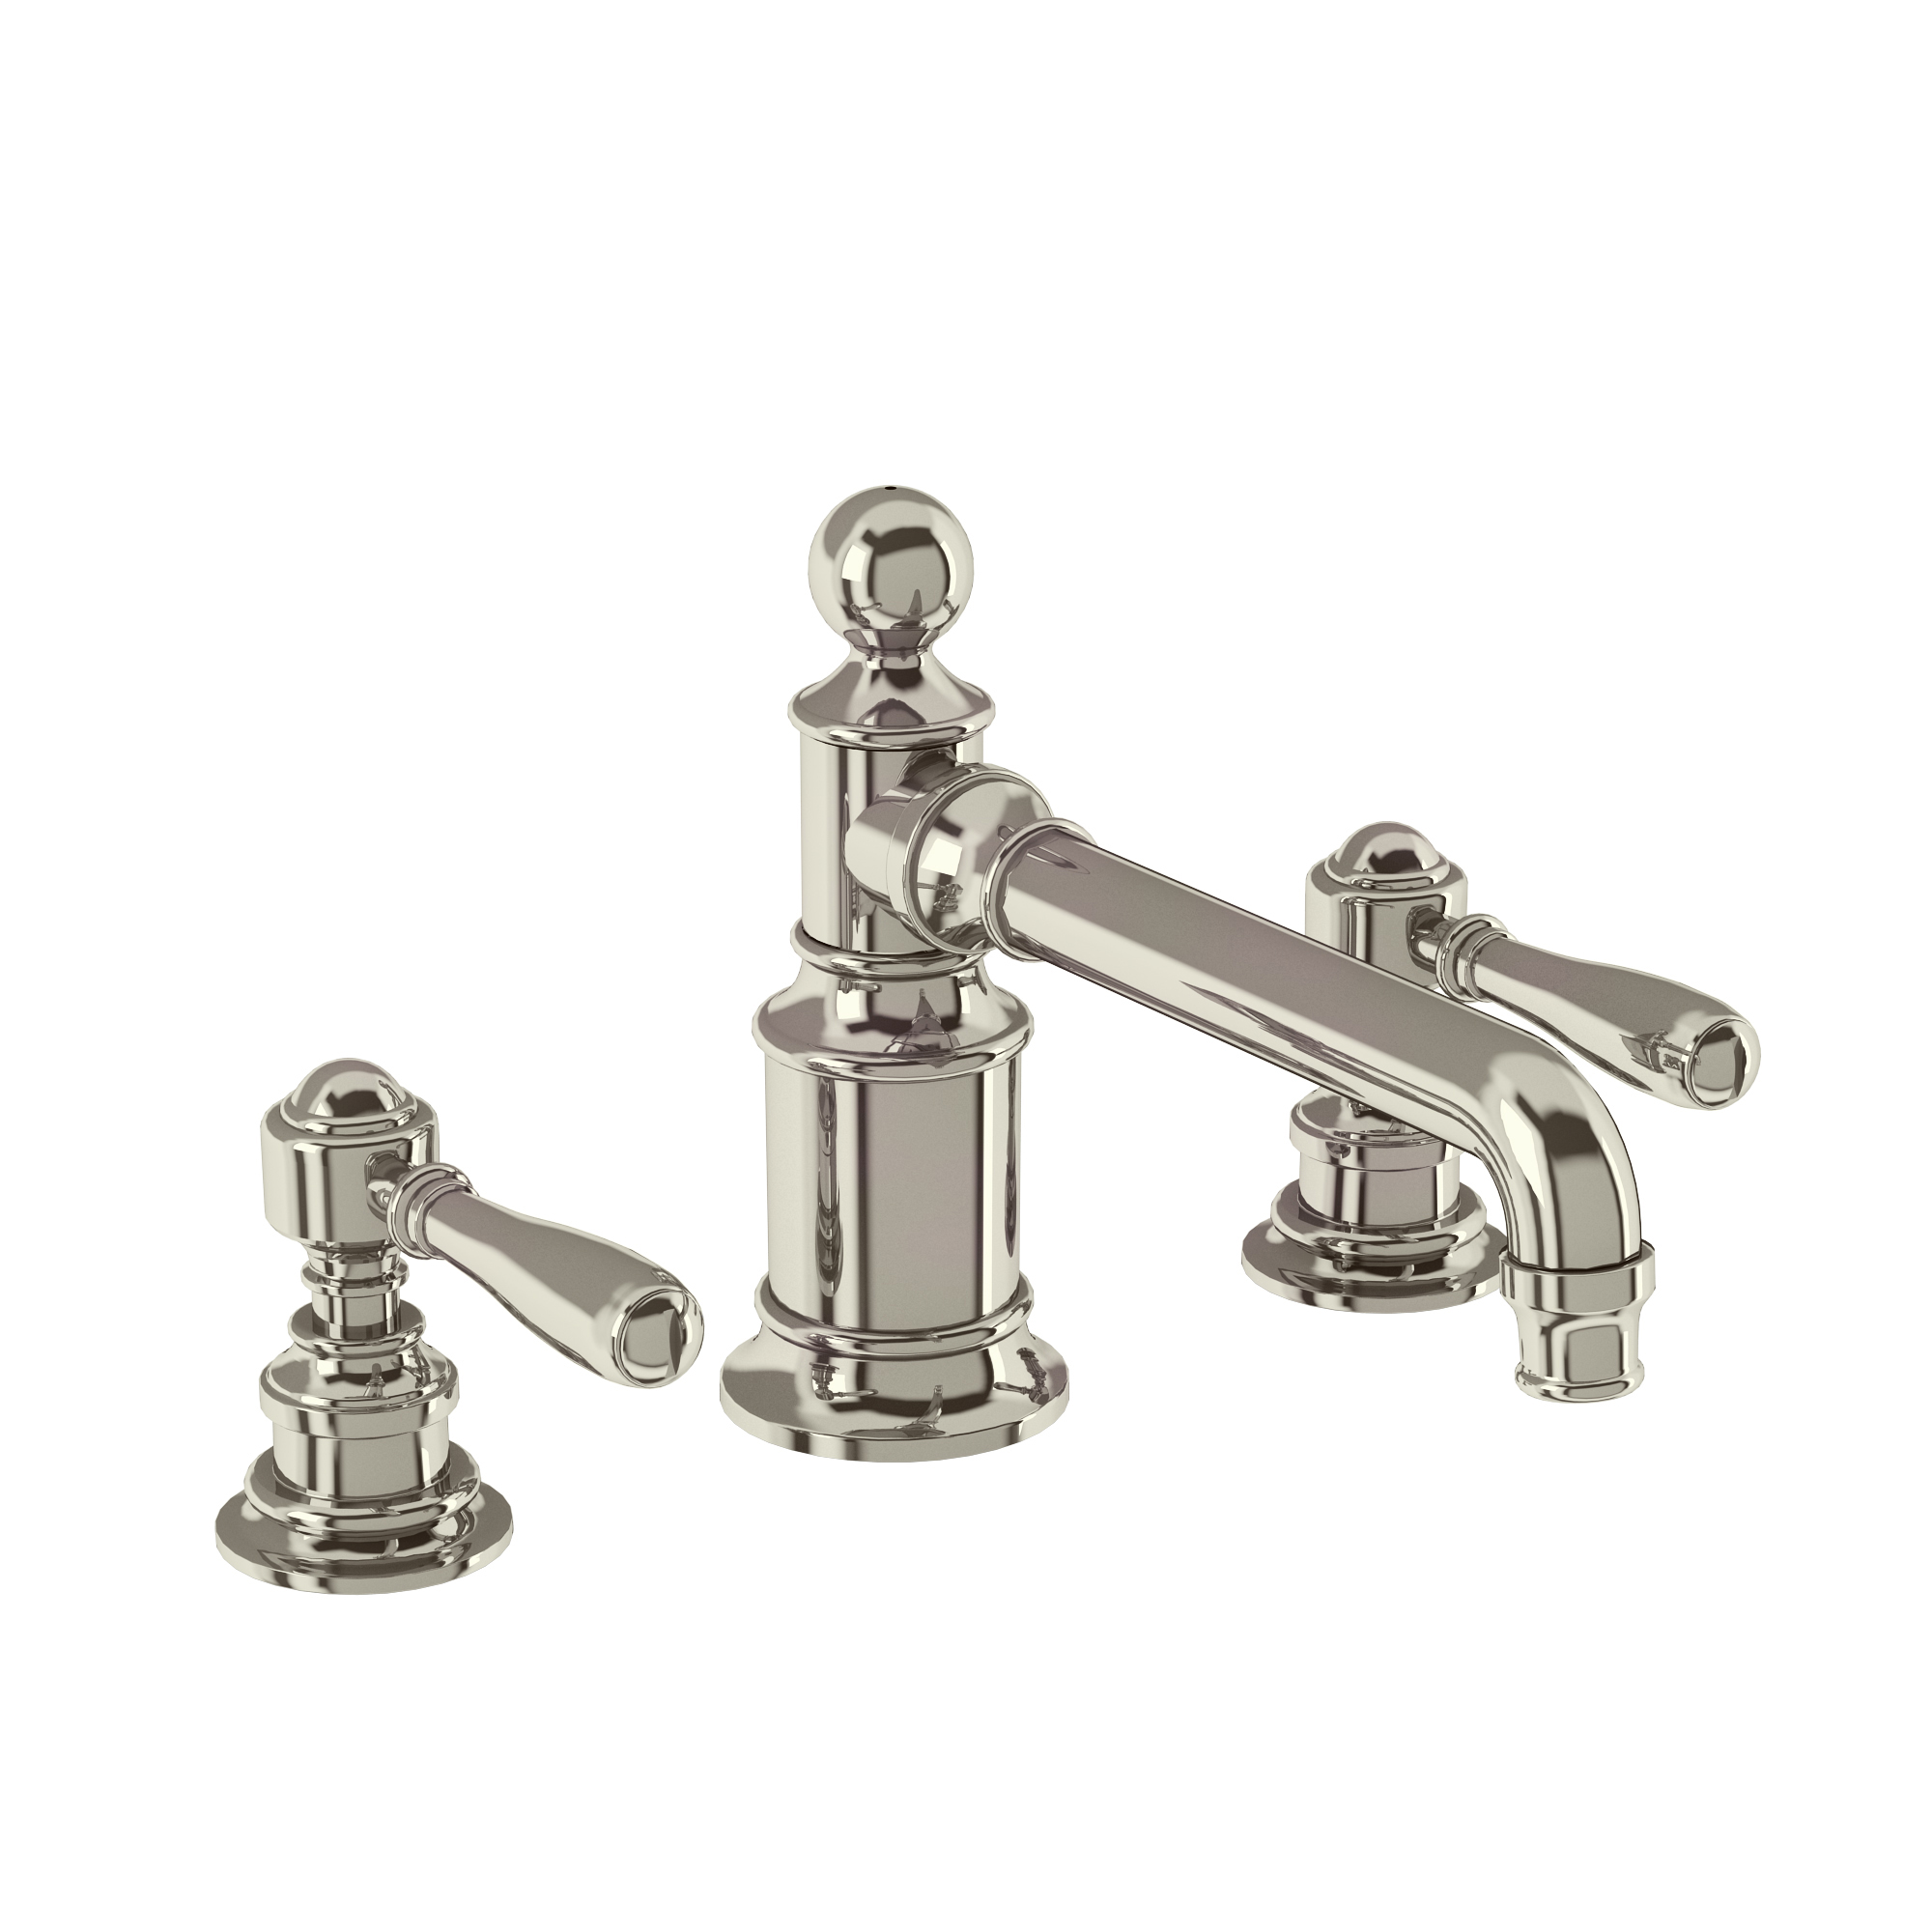 Arcade Three hole basin mixer deck-mounted without pop up waste - nickel - with brass lever